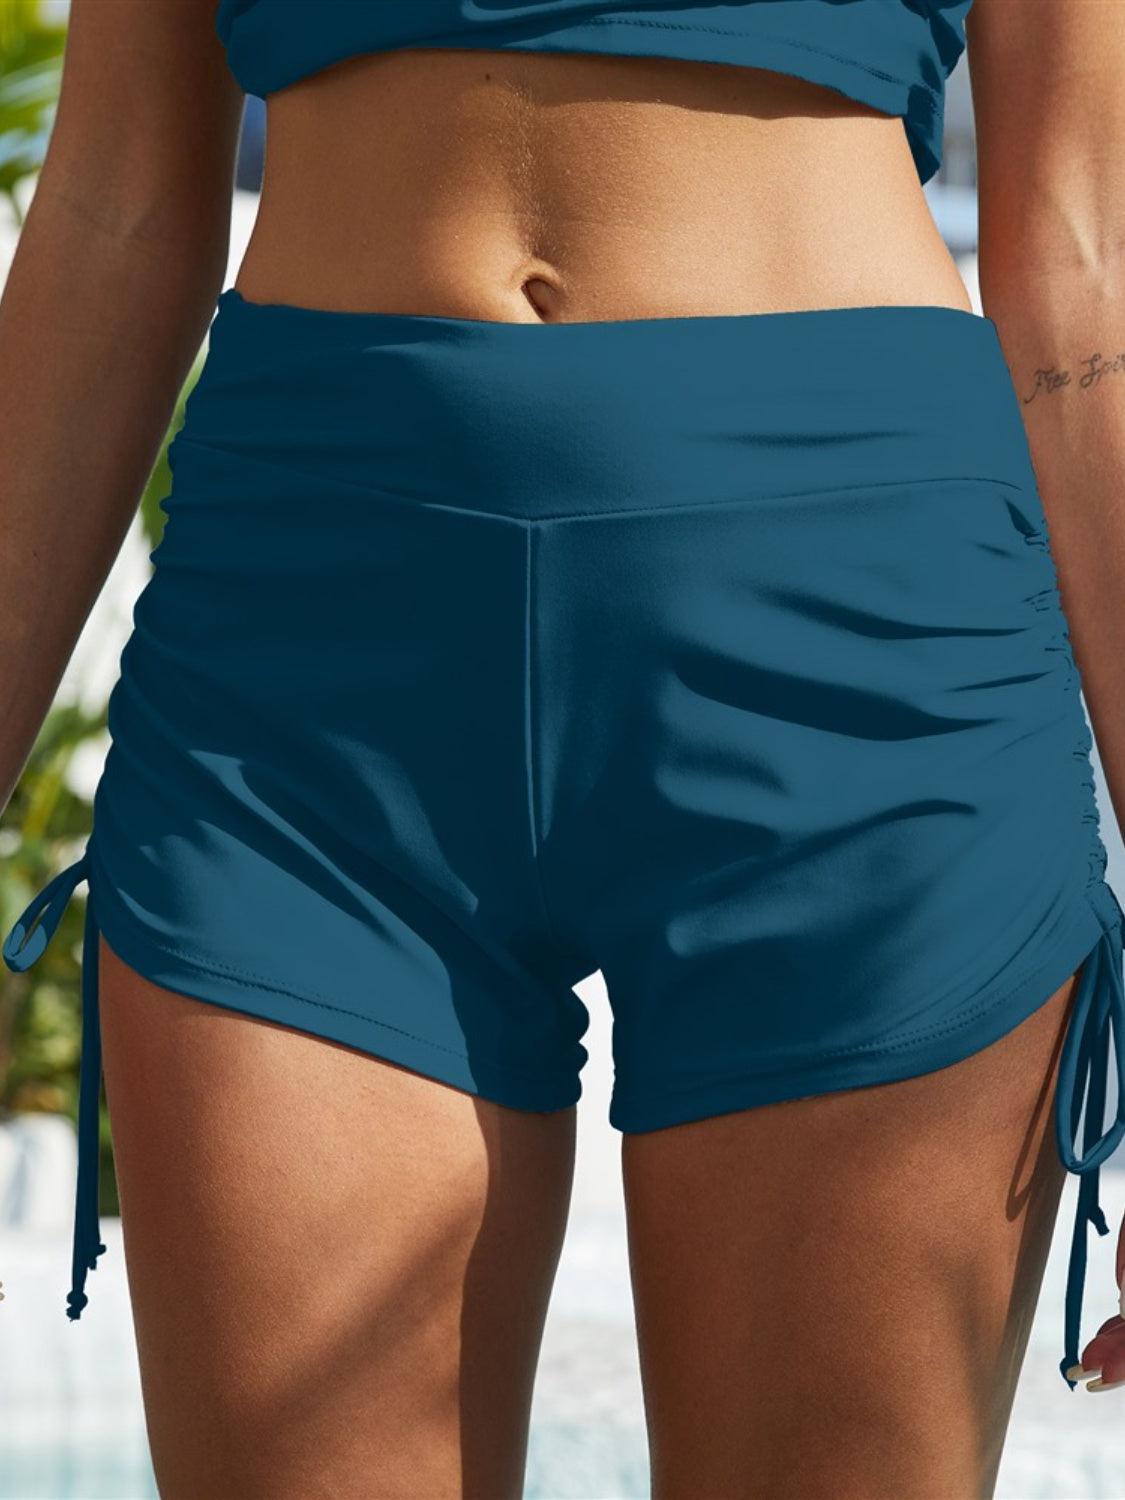 a close up of a person wearing a bikini top and shorts